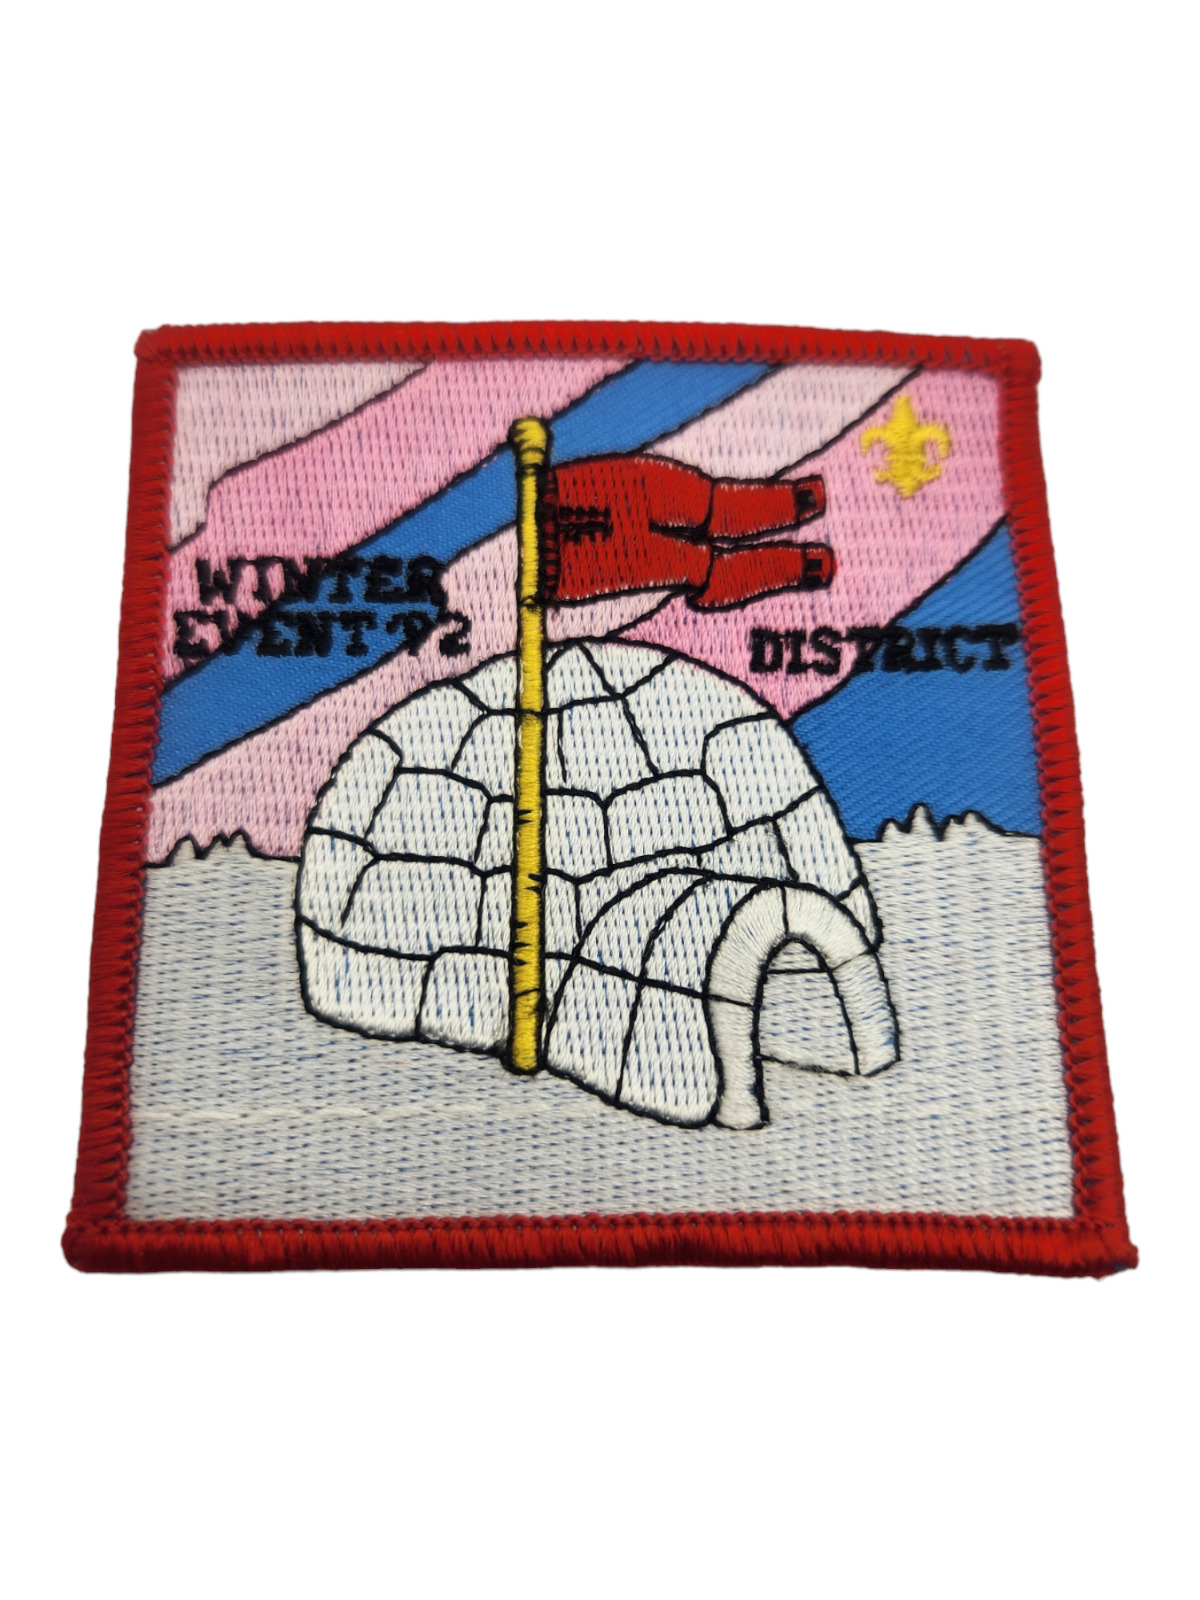 Winter Event 1992 District Igloo Boy Scout BSA Patch